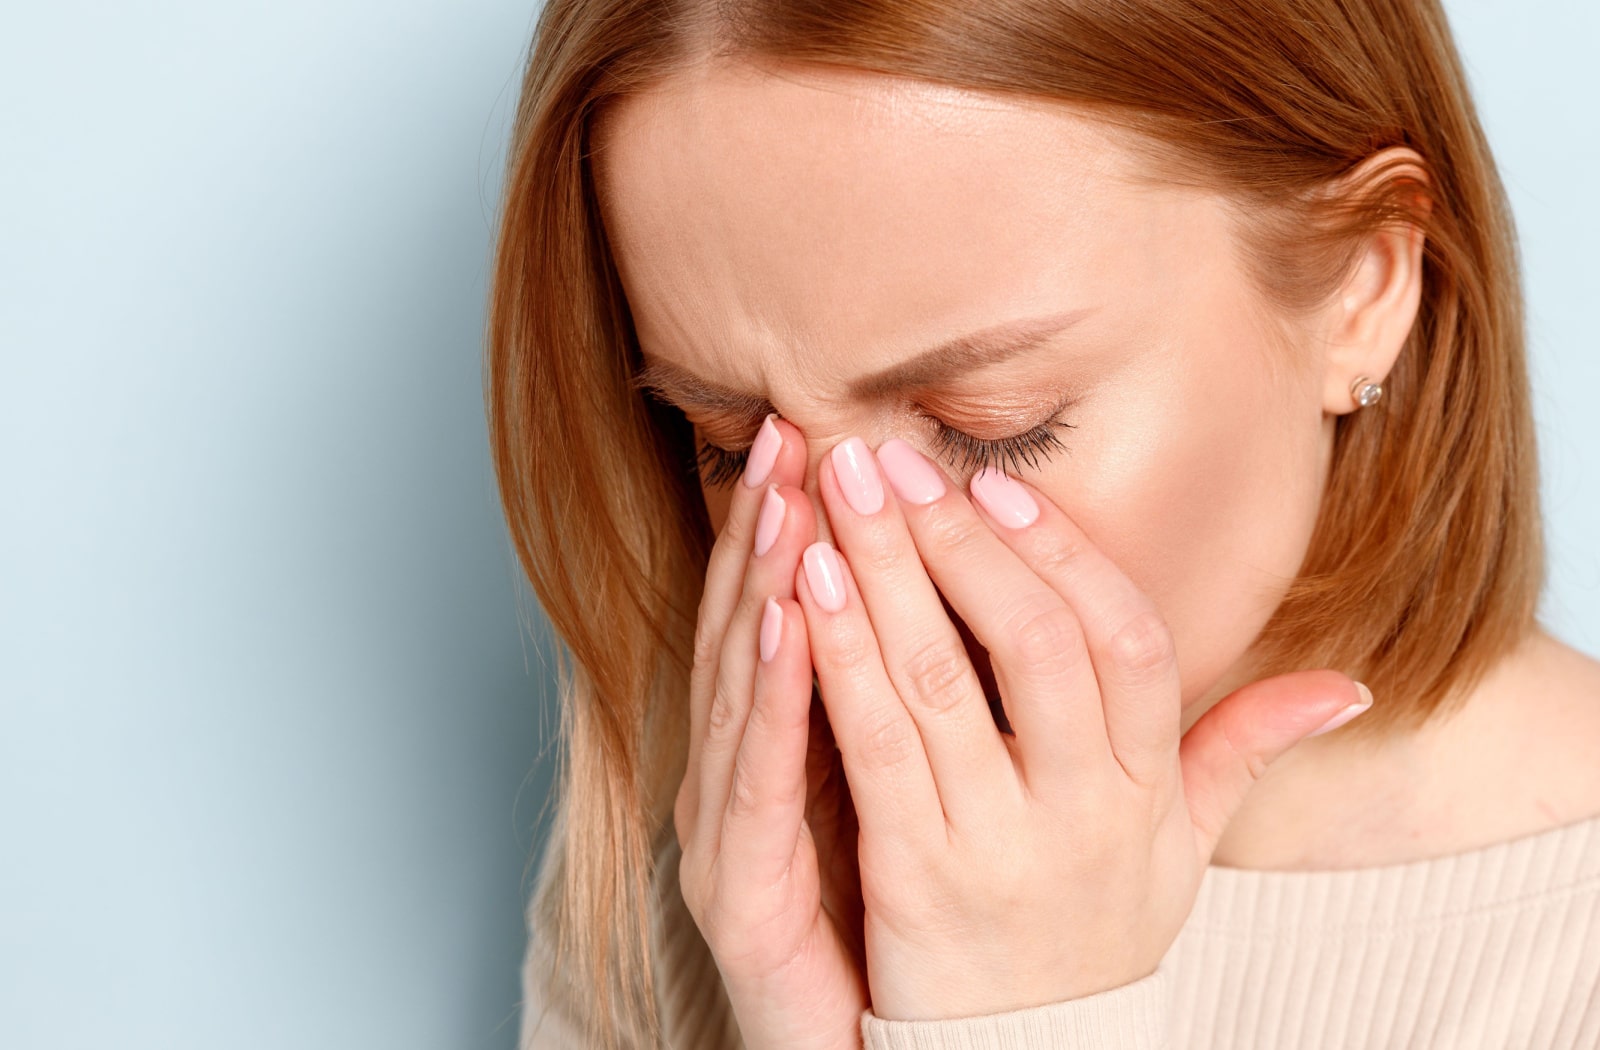 A woman holds her face due to sinus and head pressure and pain from allergies